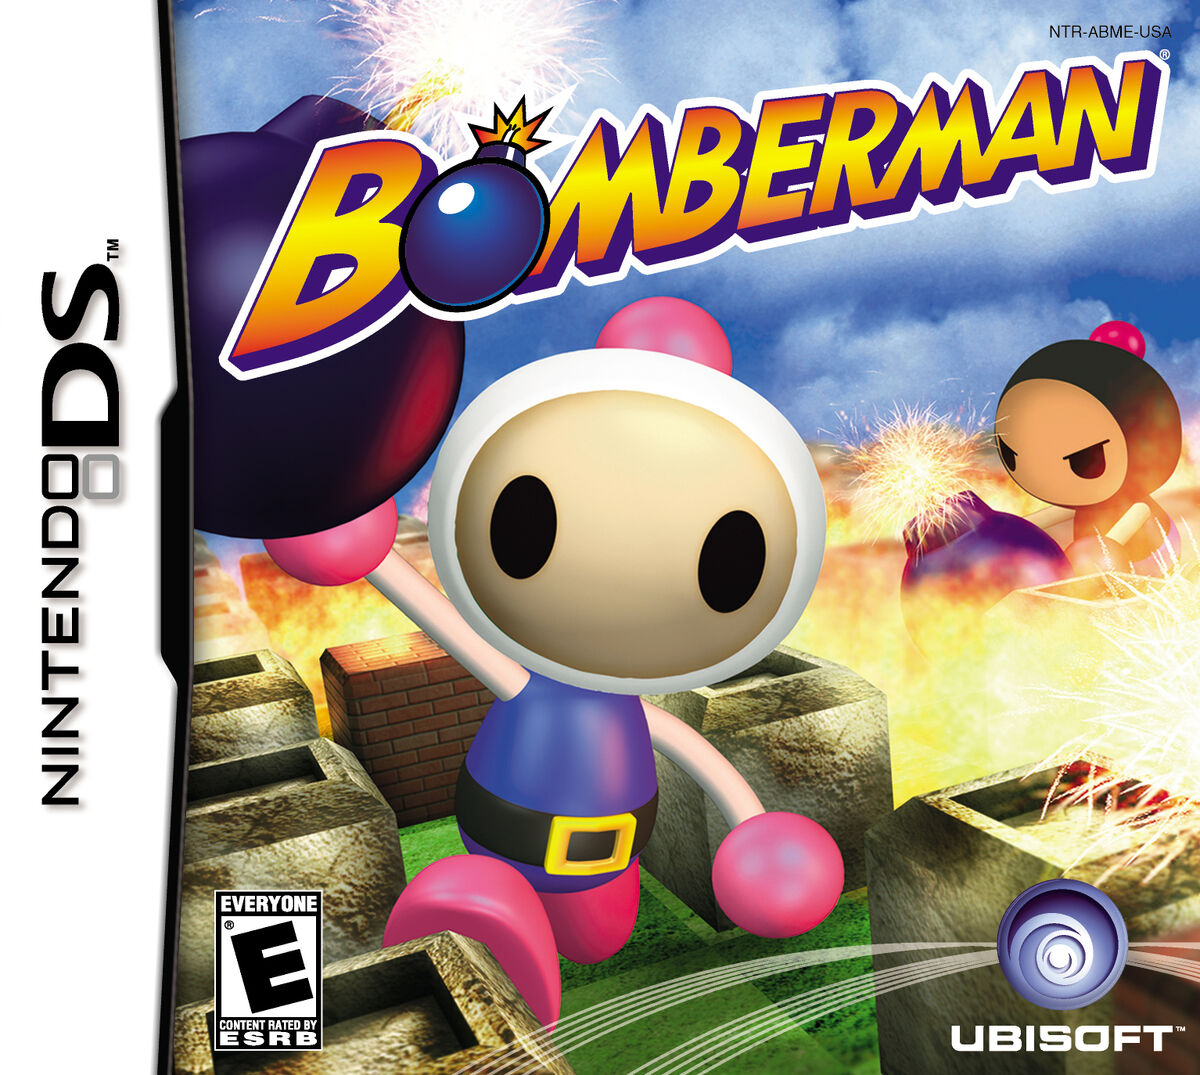 Start screen and first stage of Bomberman to the NES platform.